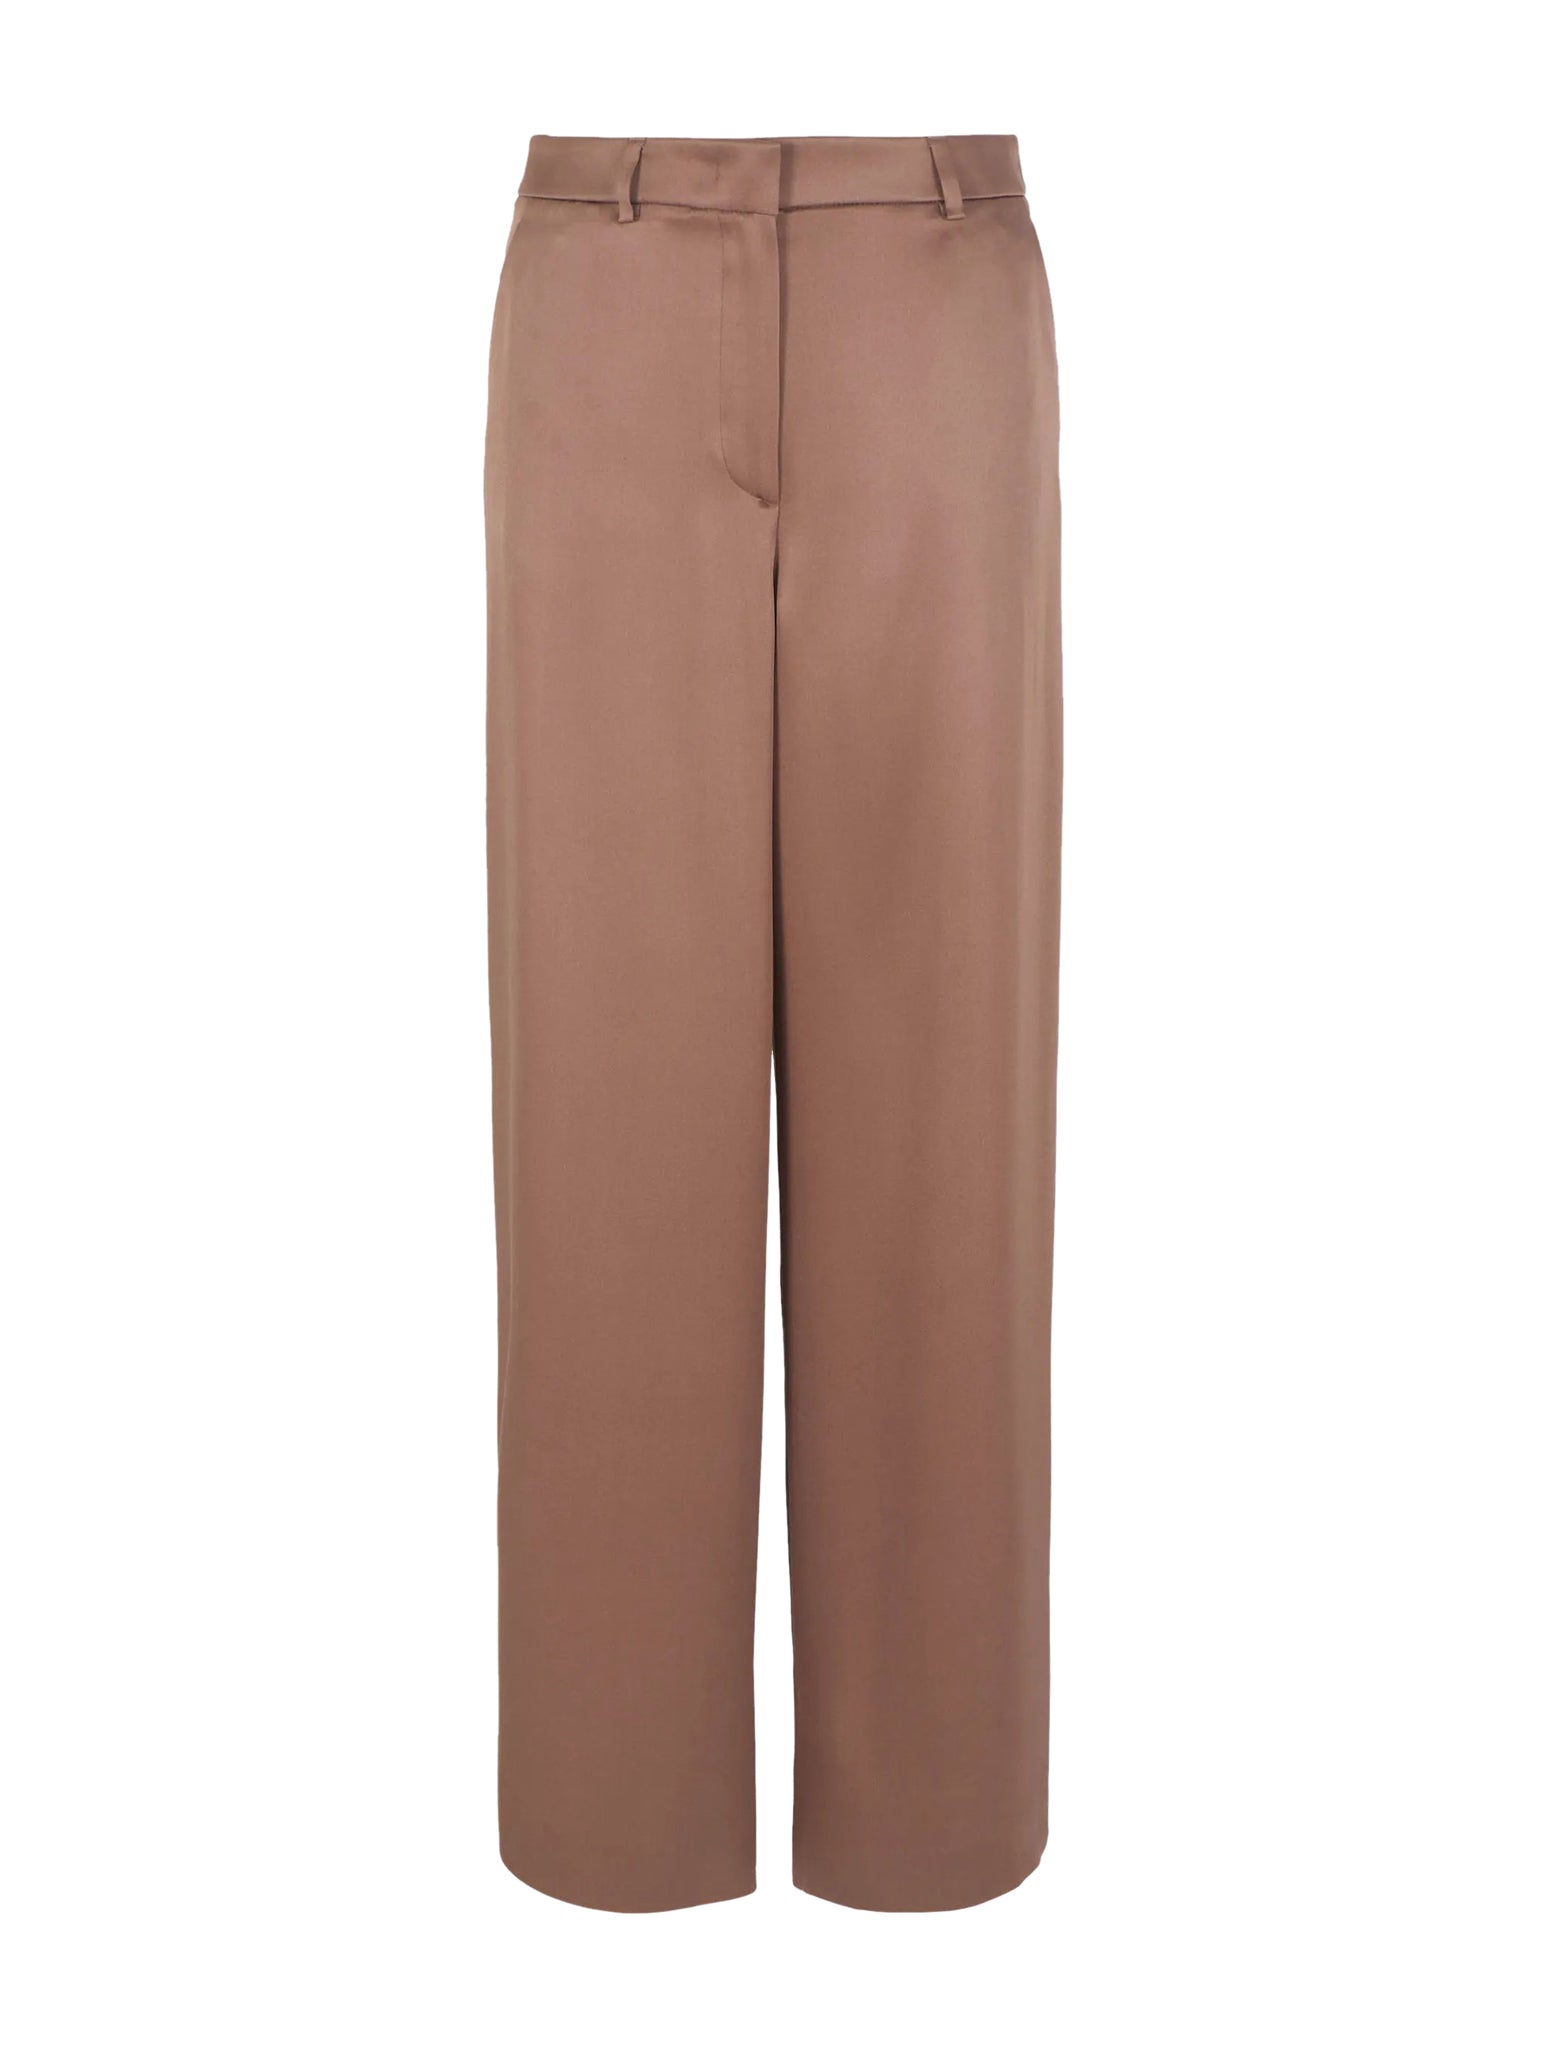 Flat front trousers in double silk satin